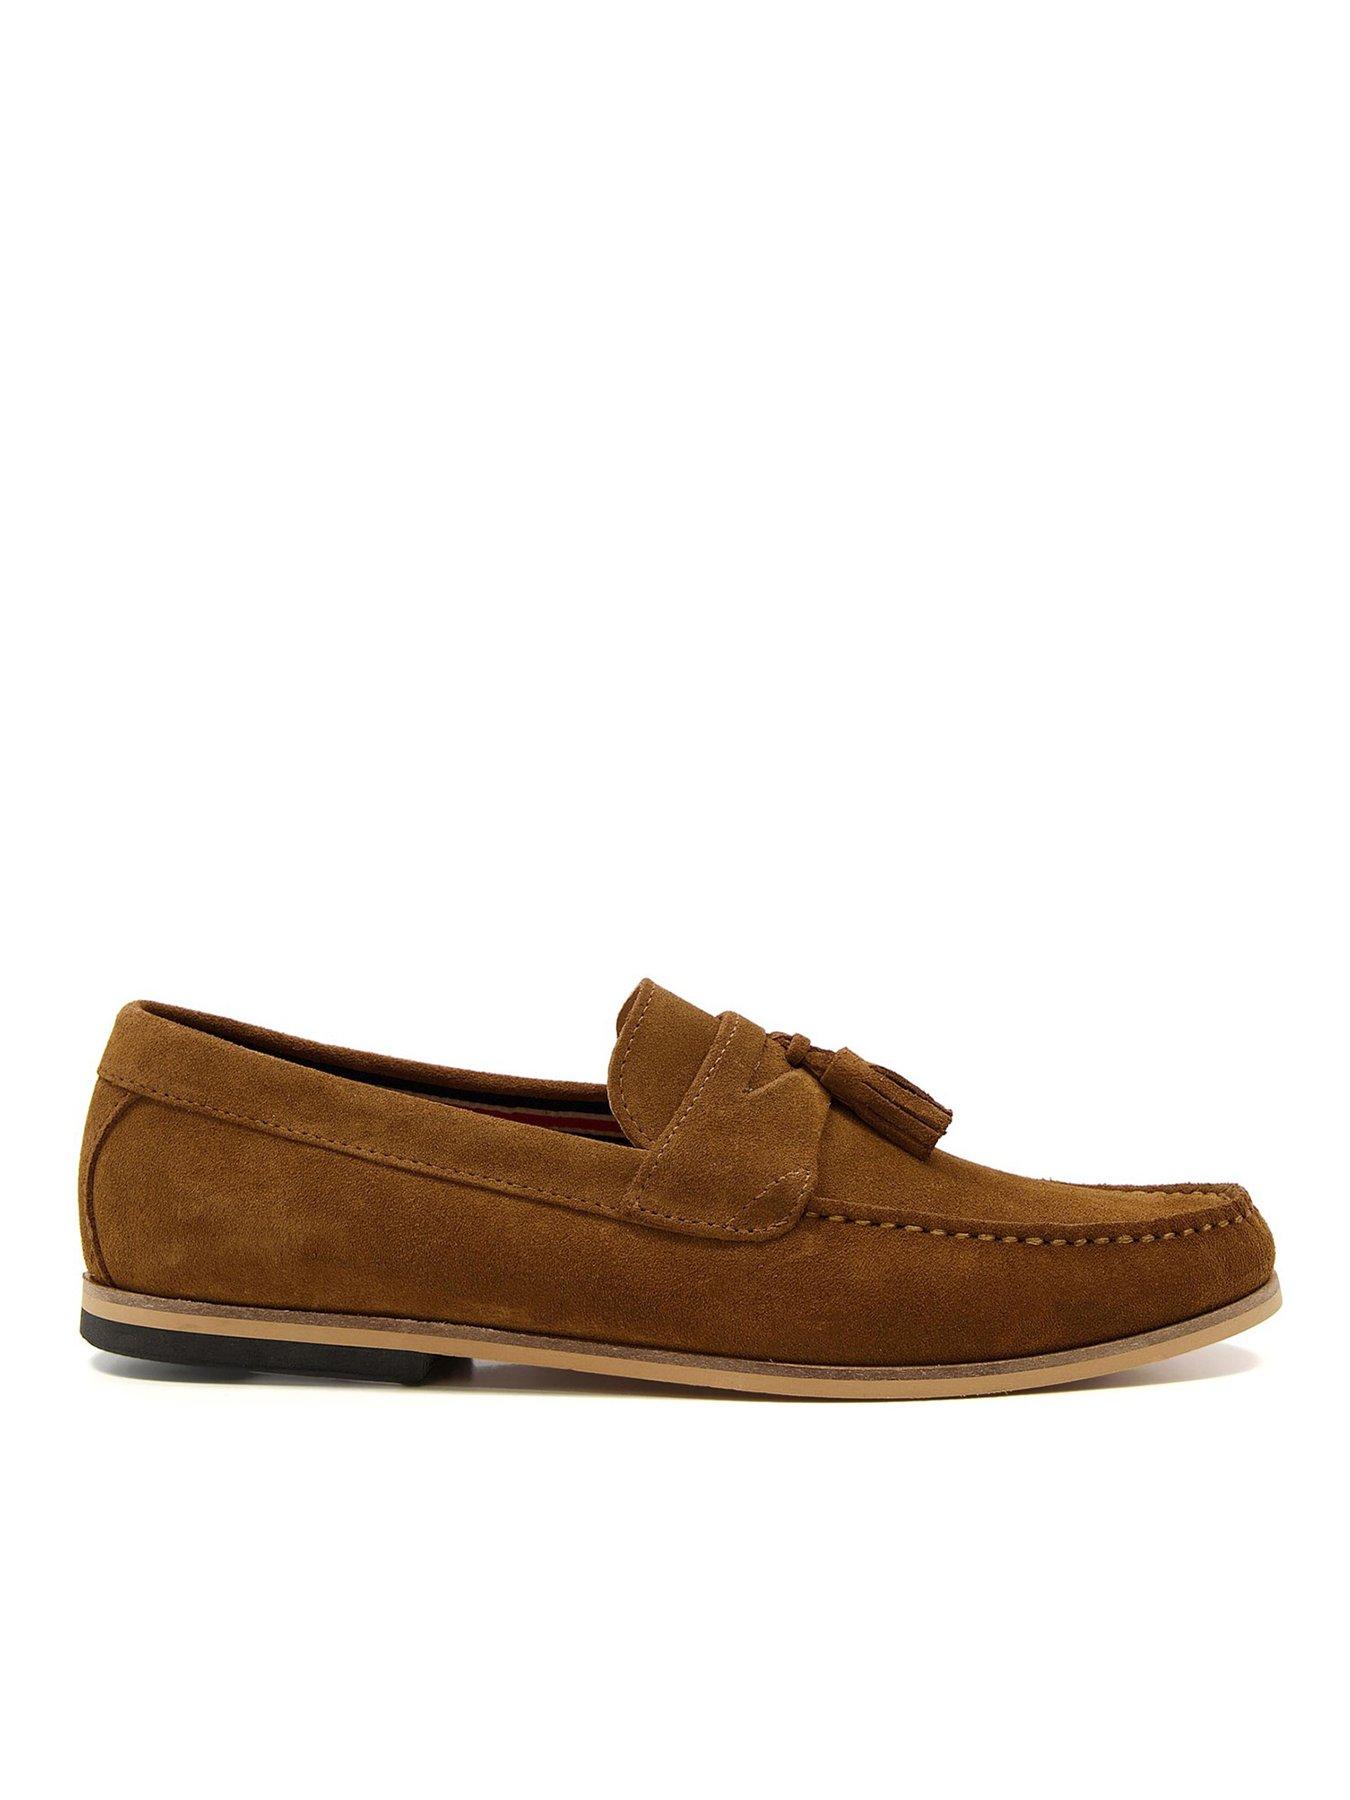 Dune London Bart Loafer - Brown | very.co.uk